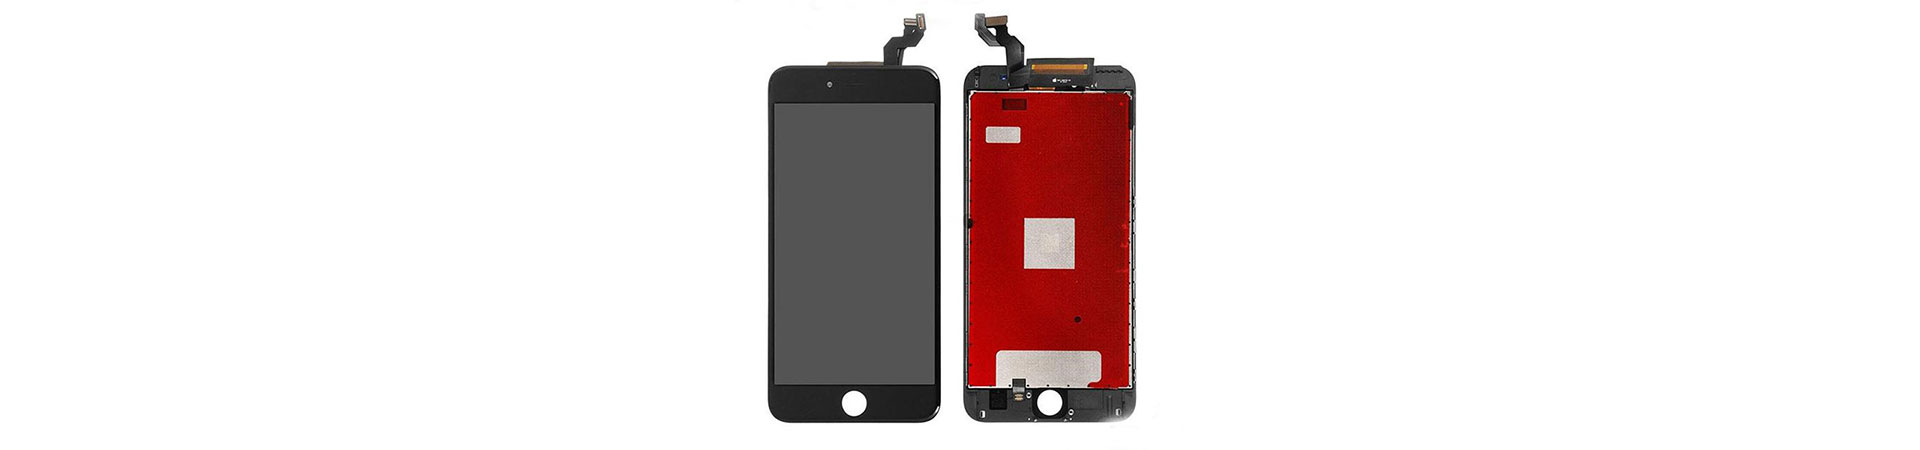 Mobile-Phone-Parts